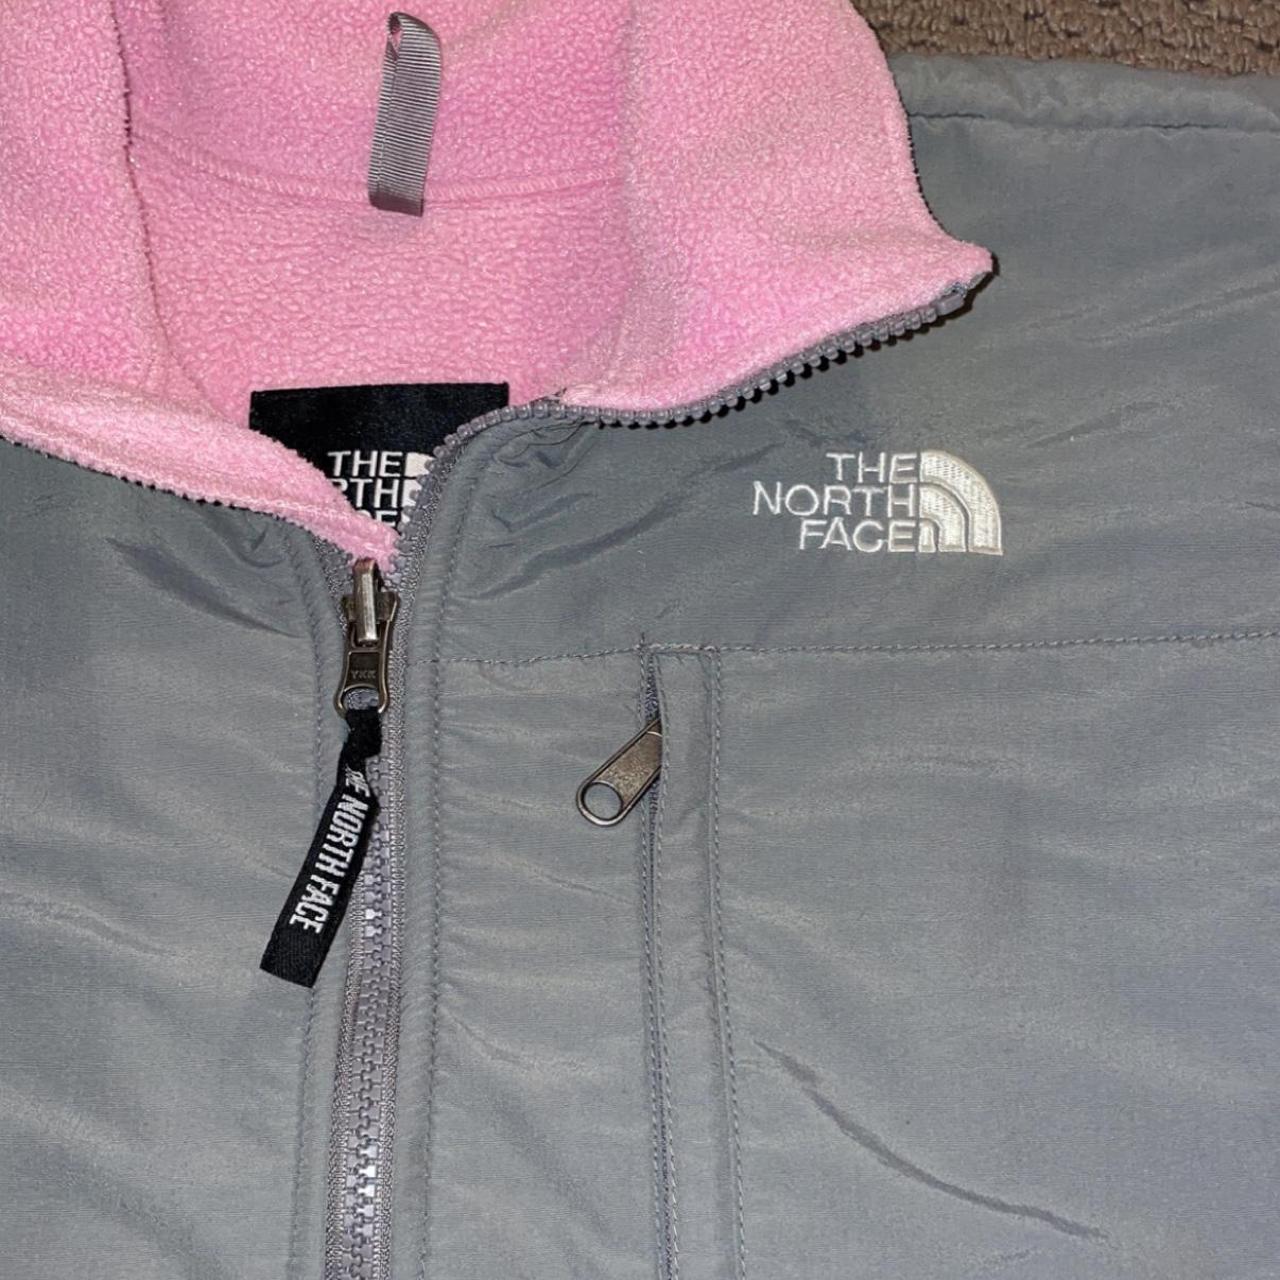 The North Face Women's Pink and Grey Sweatshirt | Depop